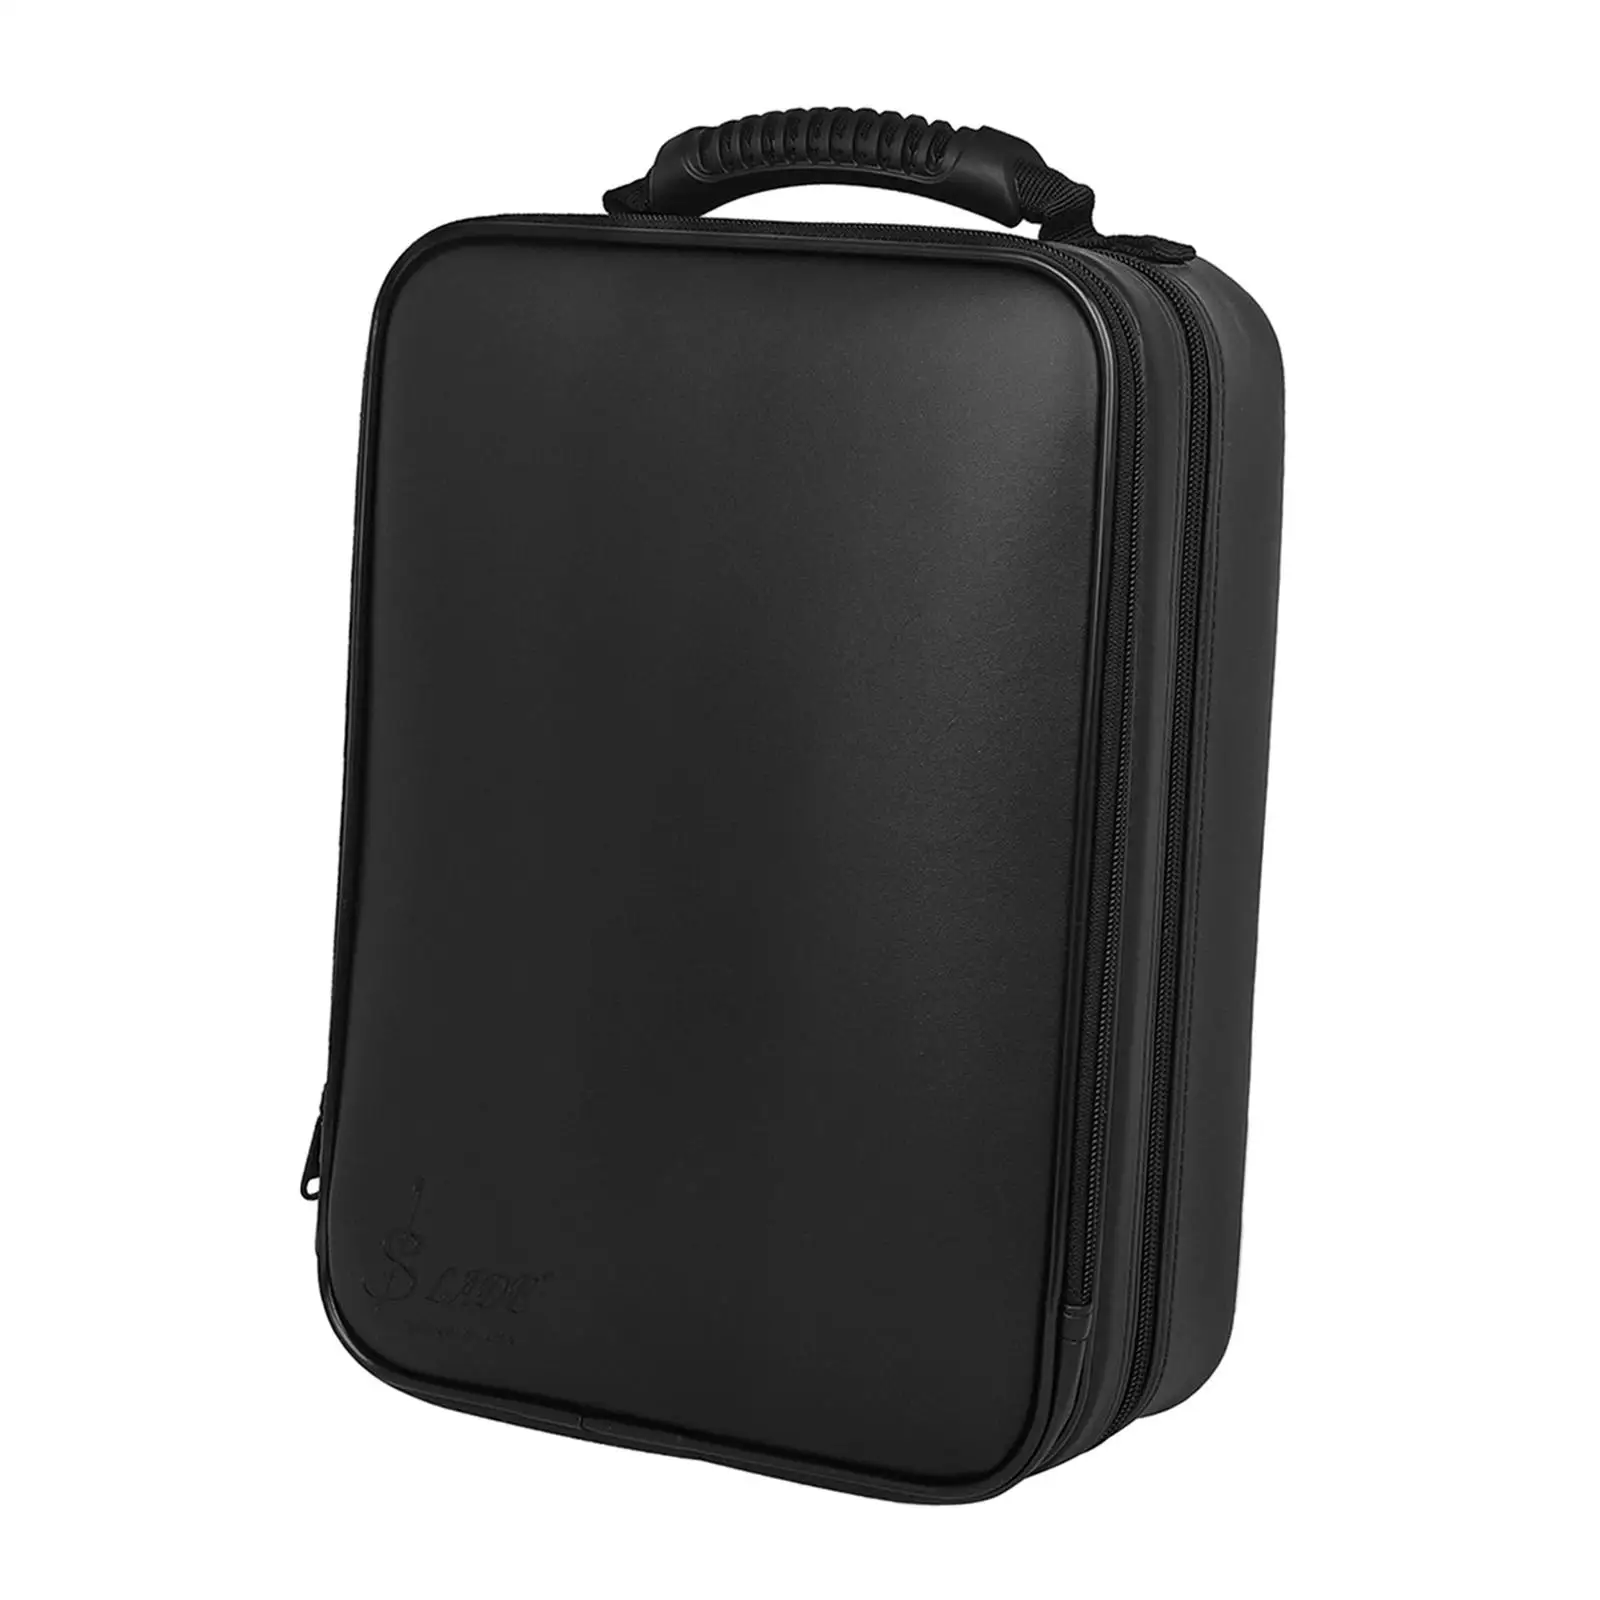 Clarinet Case PU Leather Lightweight Clarinet Gig Bag for Travel Outdoor